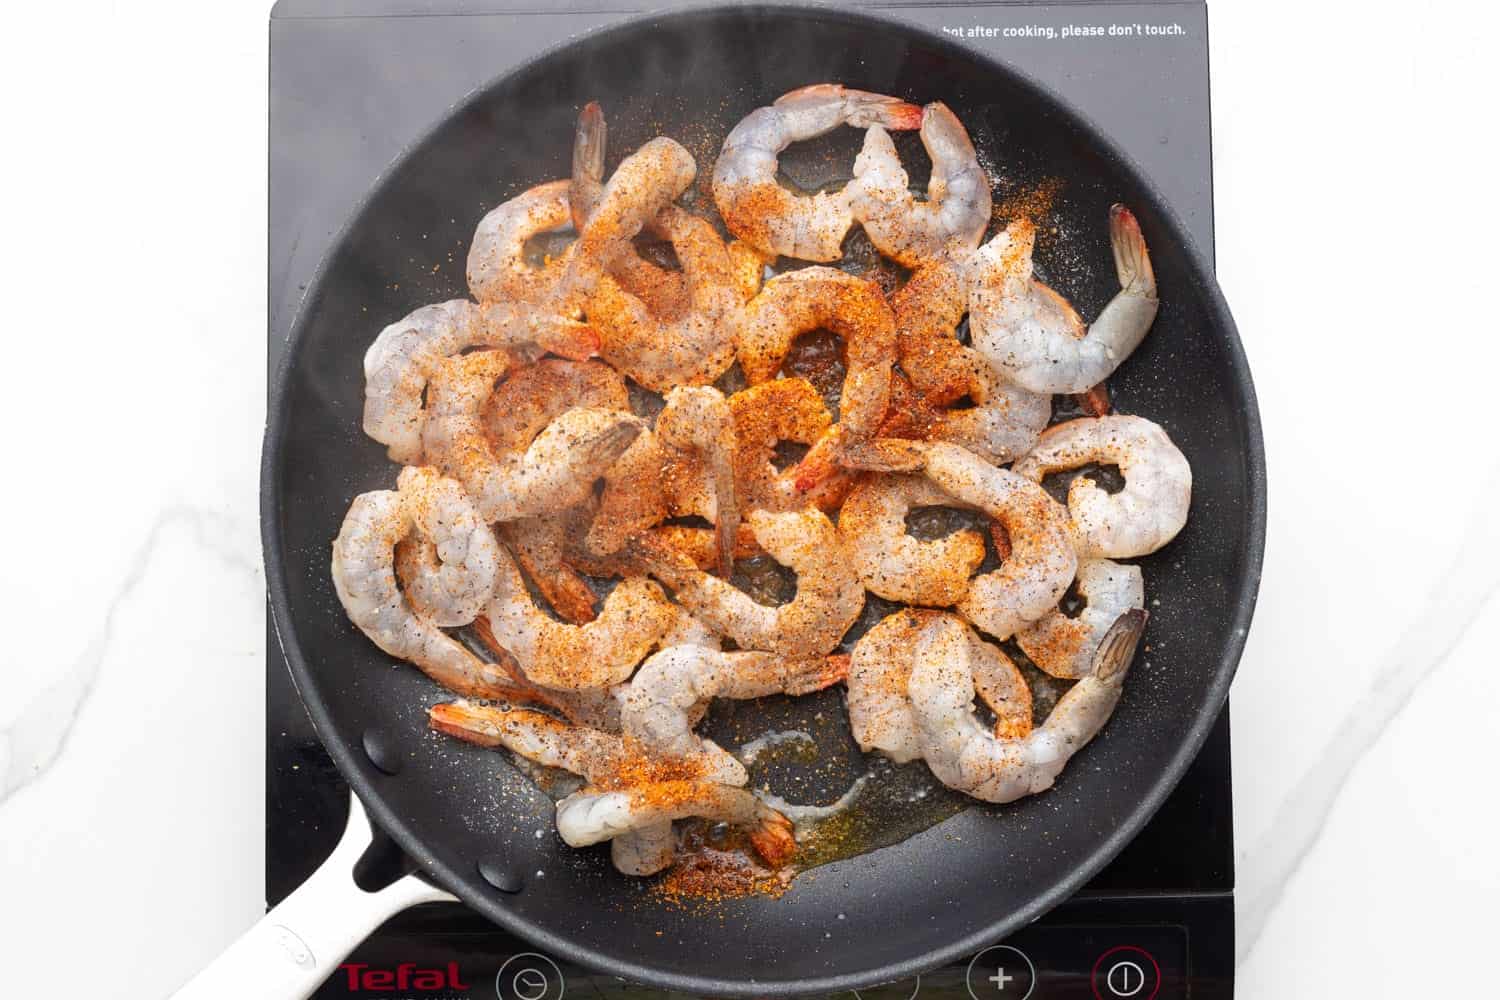 A non-stick frying han holding seasoned shrimp and oil.